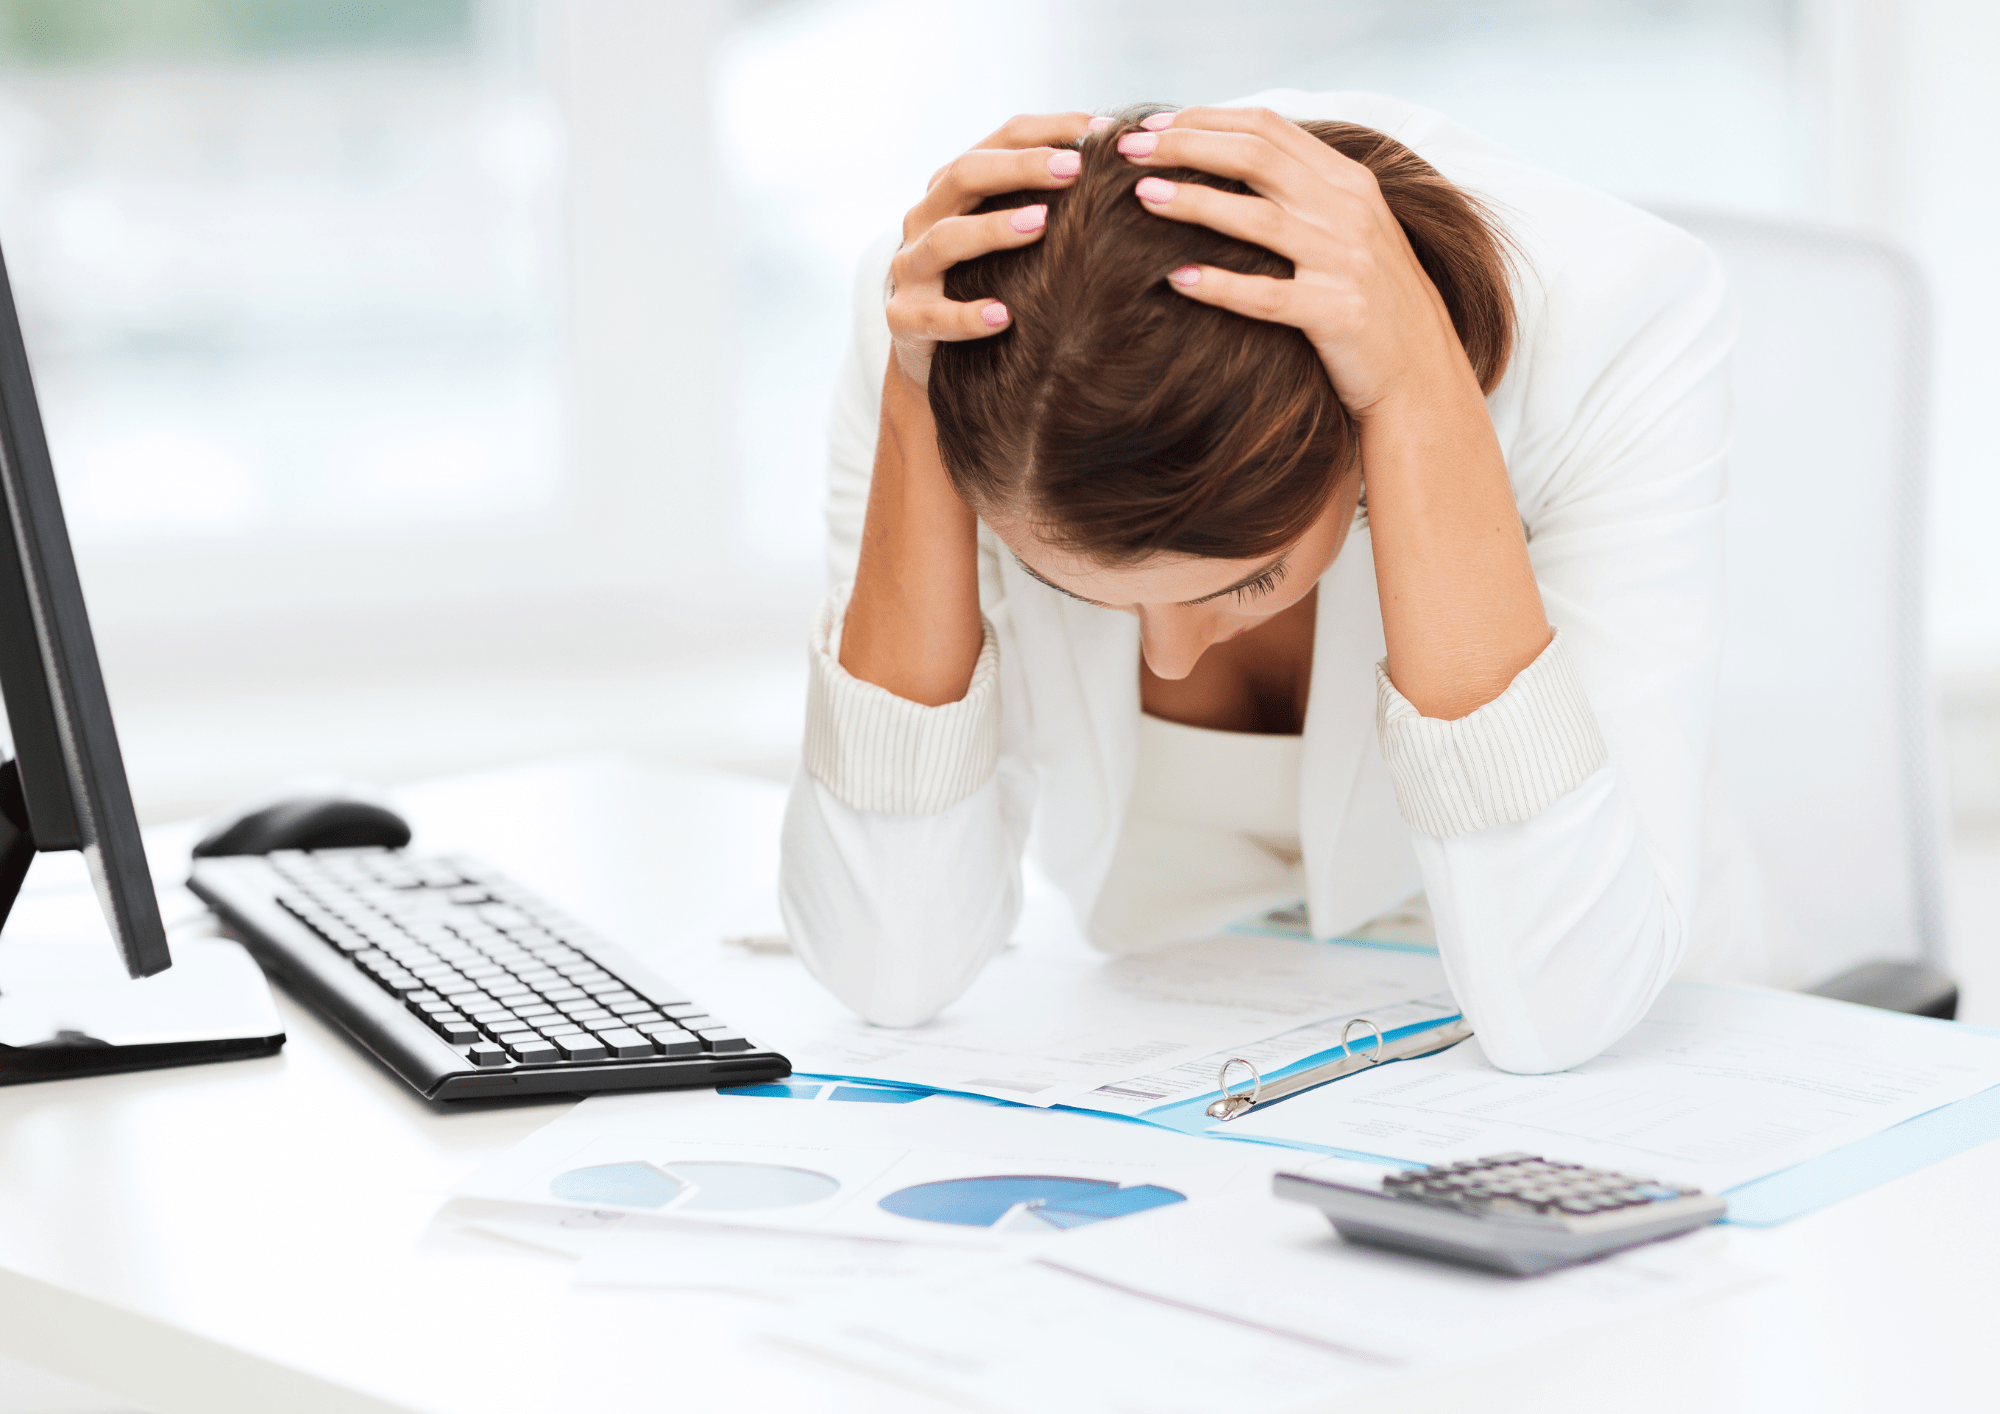 Common bookkeeping mistakes to avoid